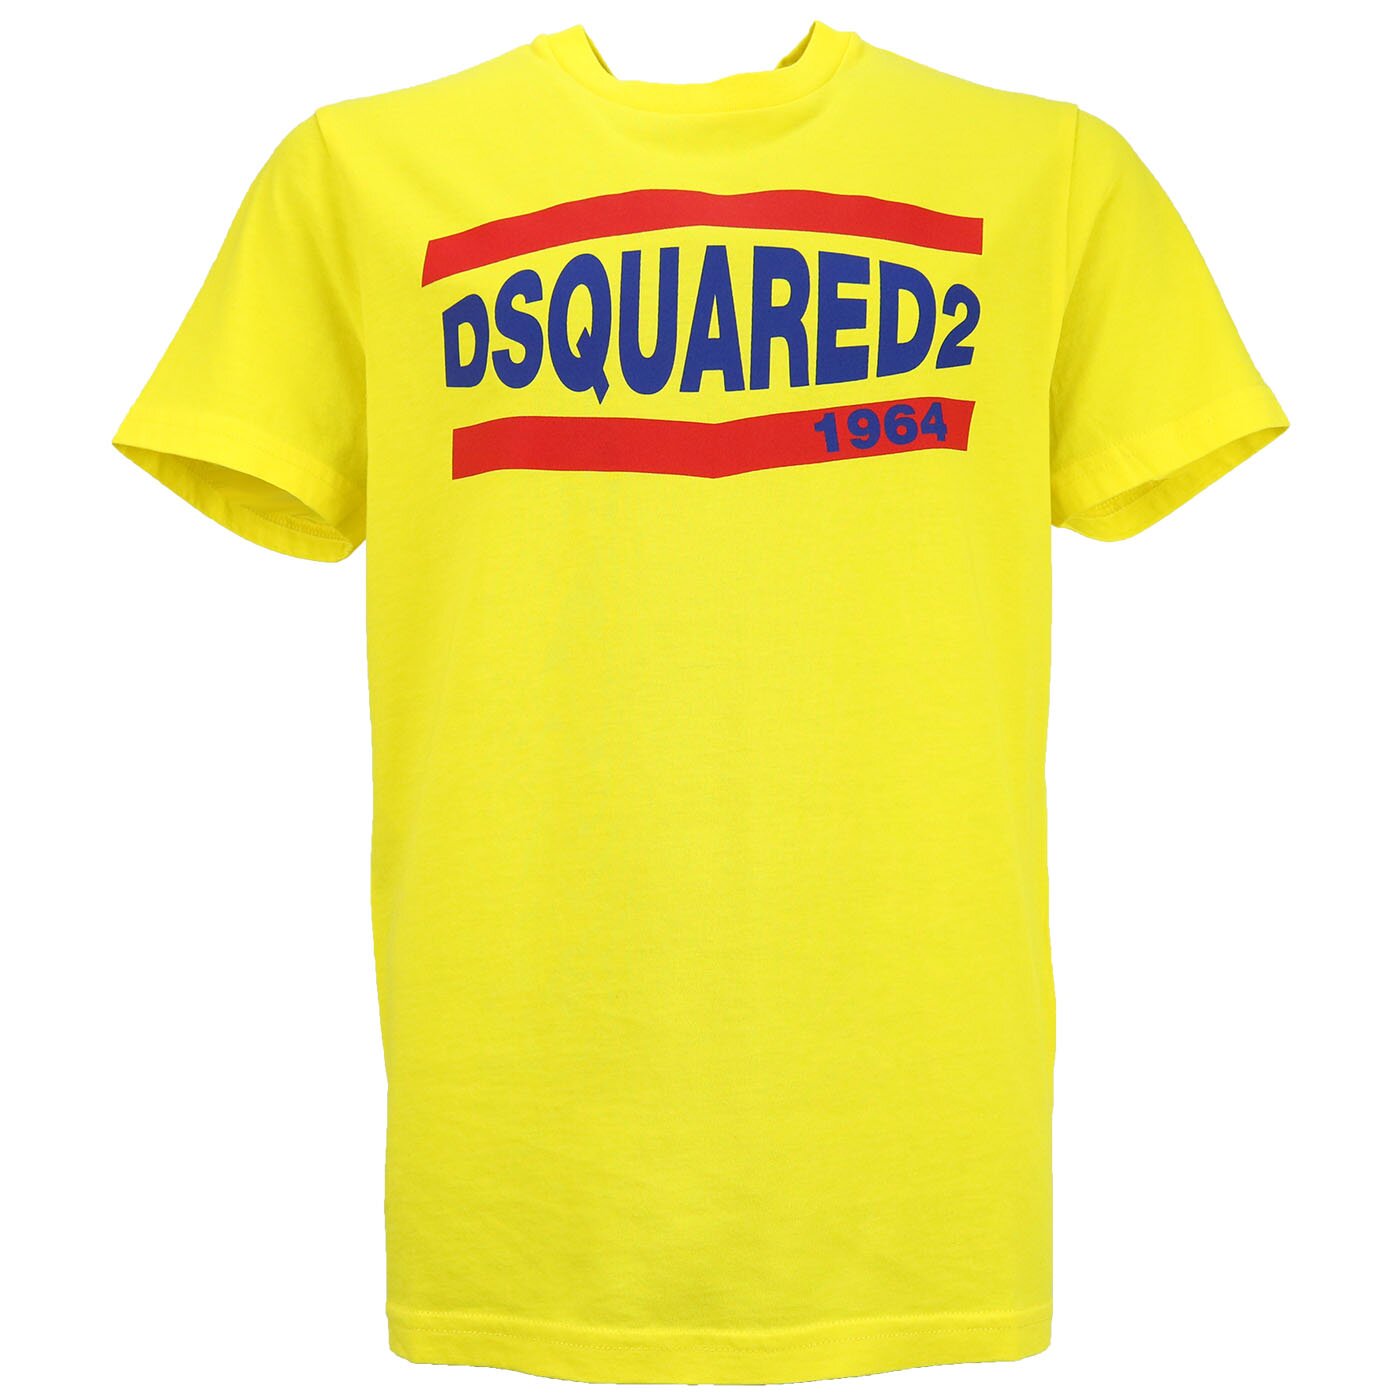 Dsquared2 Shirt 1964 Geel relax fit